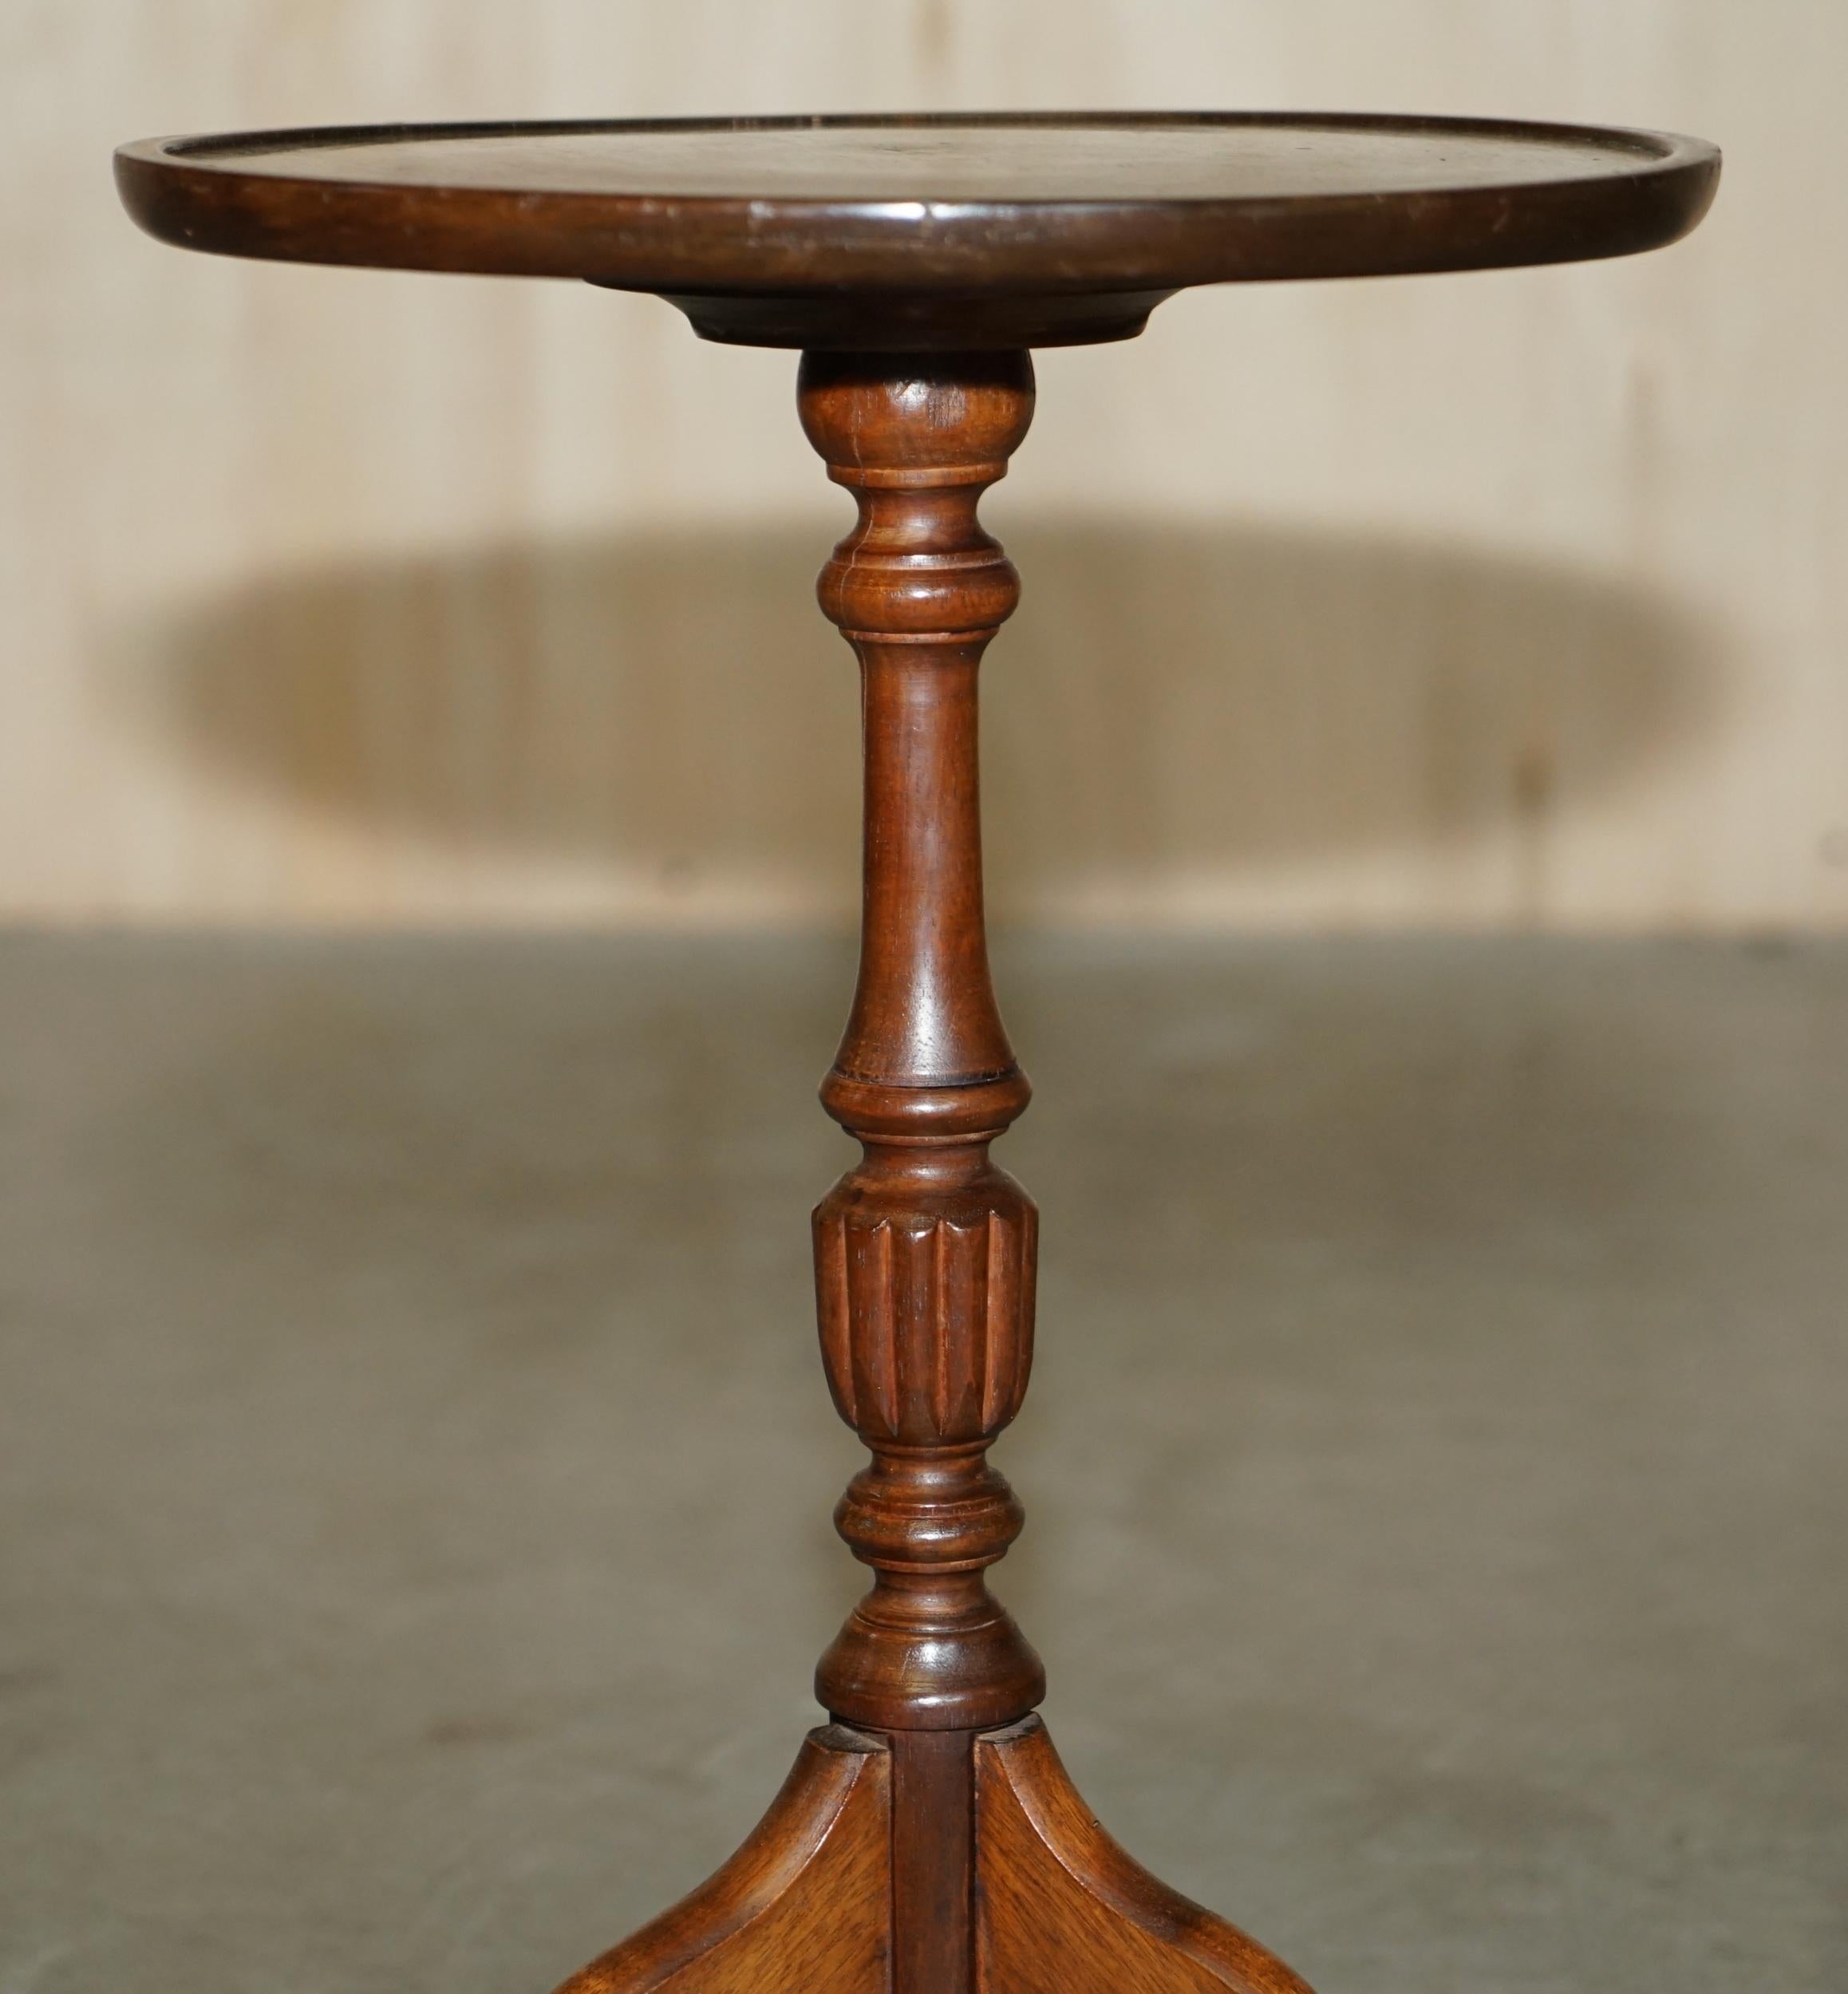 Hand-Crafted Lovely Vintage Hardwood Tripod Lamp Side End Wine Table a Very Versatile Piece